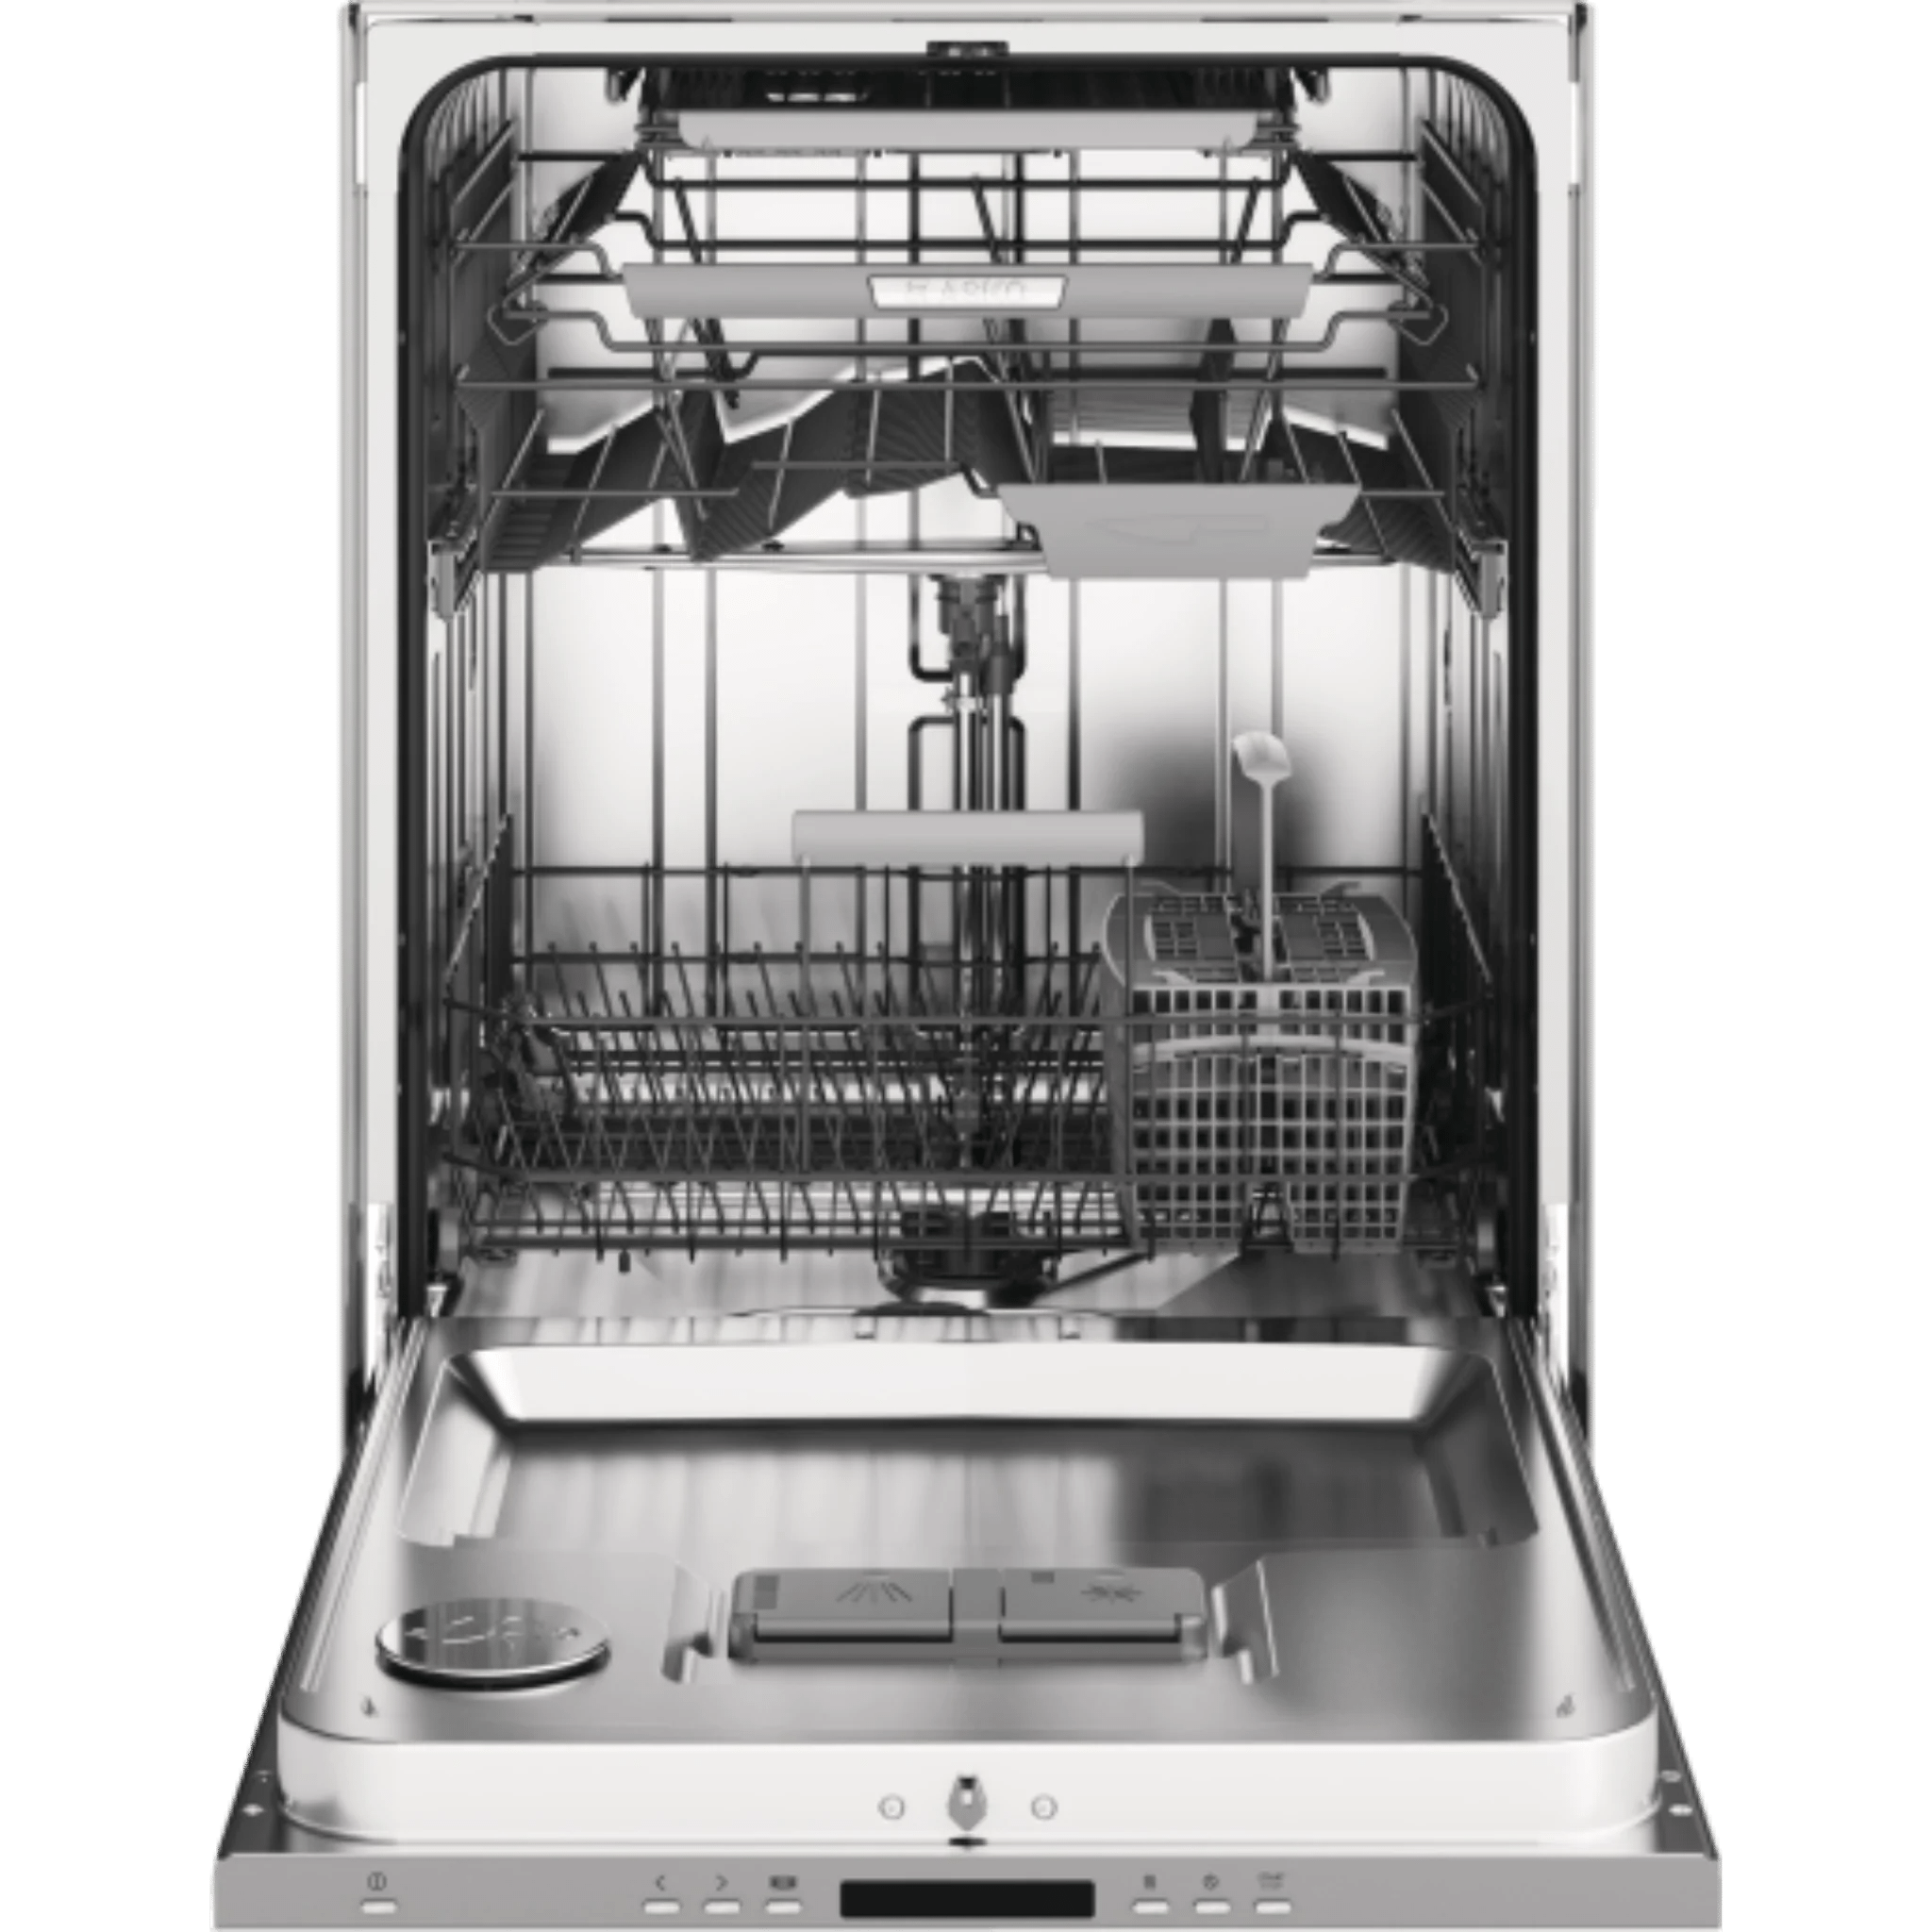 Asko 30 Series 24 Inch Wide 16 Place Setting Energy Star Rated Built-In Top Control Dishwasher with Turbo Drying and Pocket Handle Dishwashers DBI663IS Luxury Appliances Direct